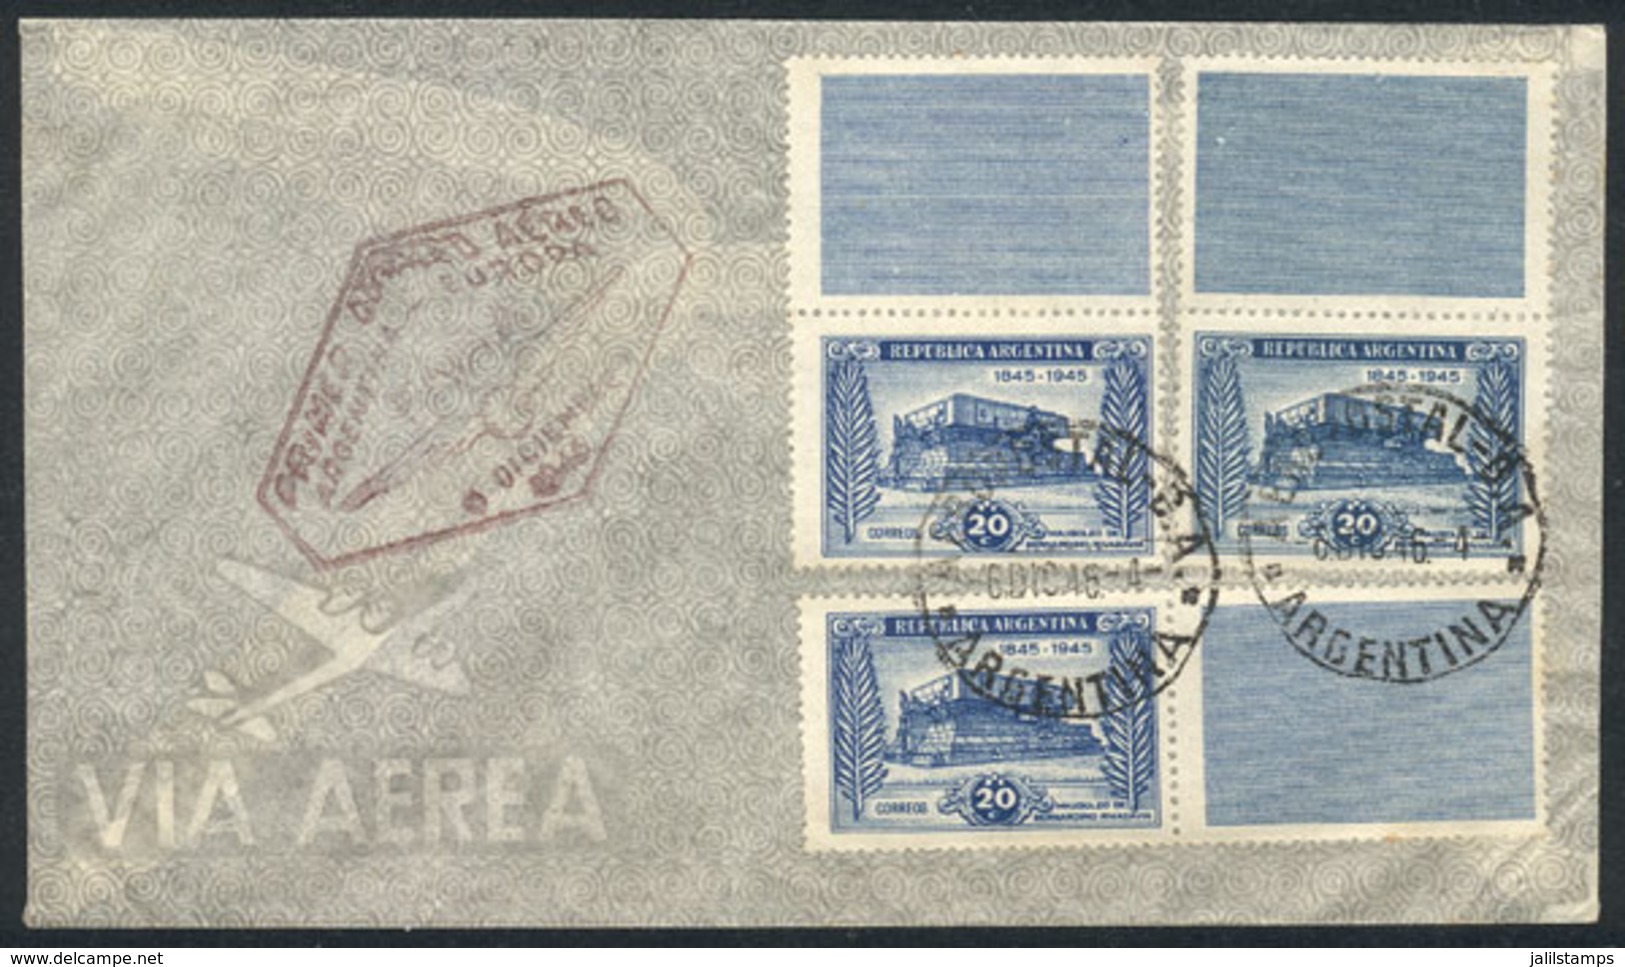 ARGENTINA: GJ.925CA + 925CD, 1945 Mausoleum Of Rivadavia 20c. With Labels At Top (2) And On The Right, On A Cover Flown  - Gebruikt